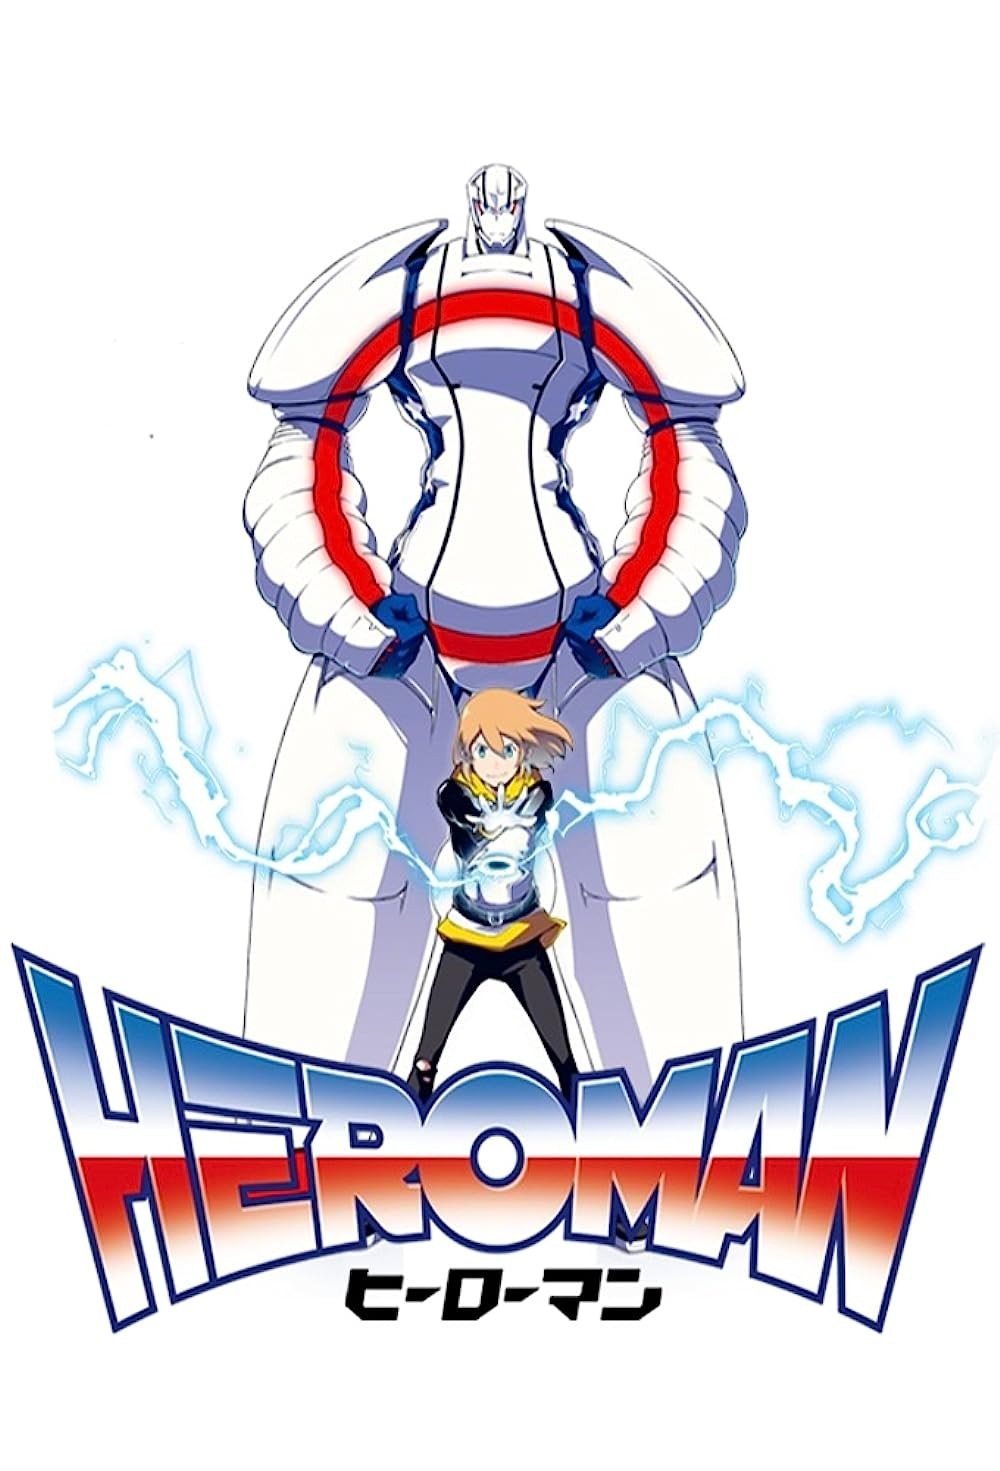 A New Hero for the 21st Century: Heroman review